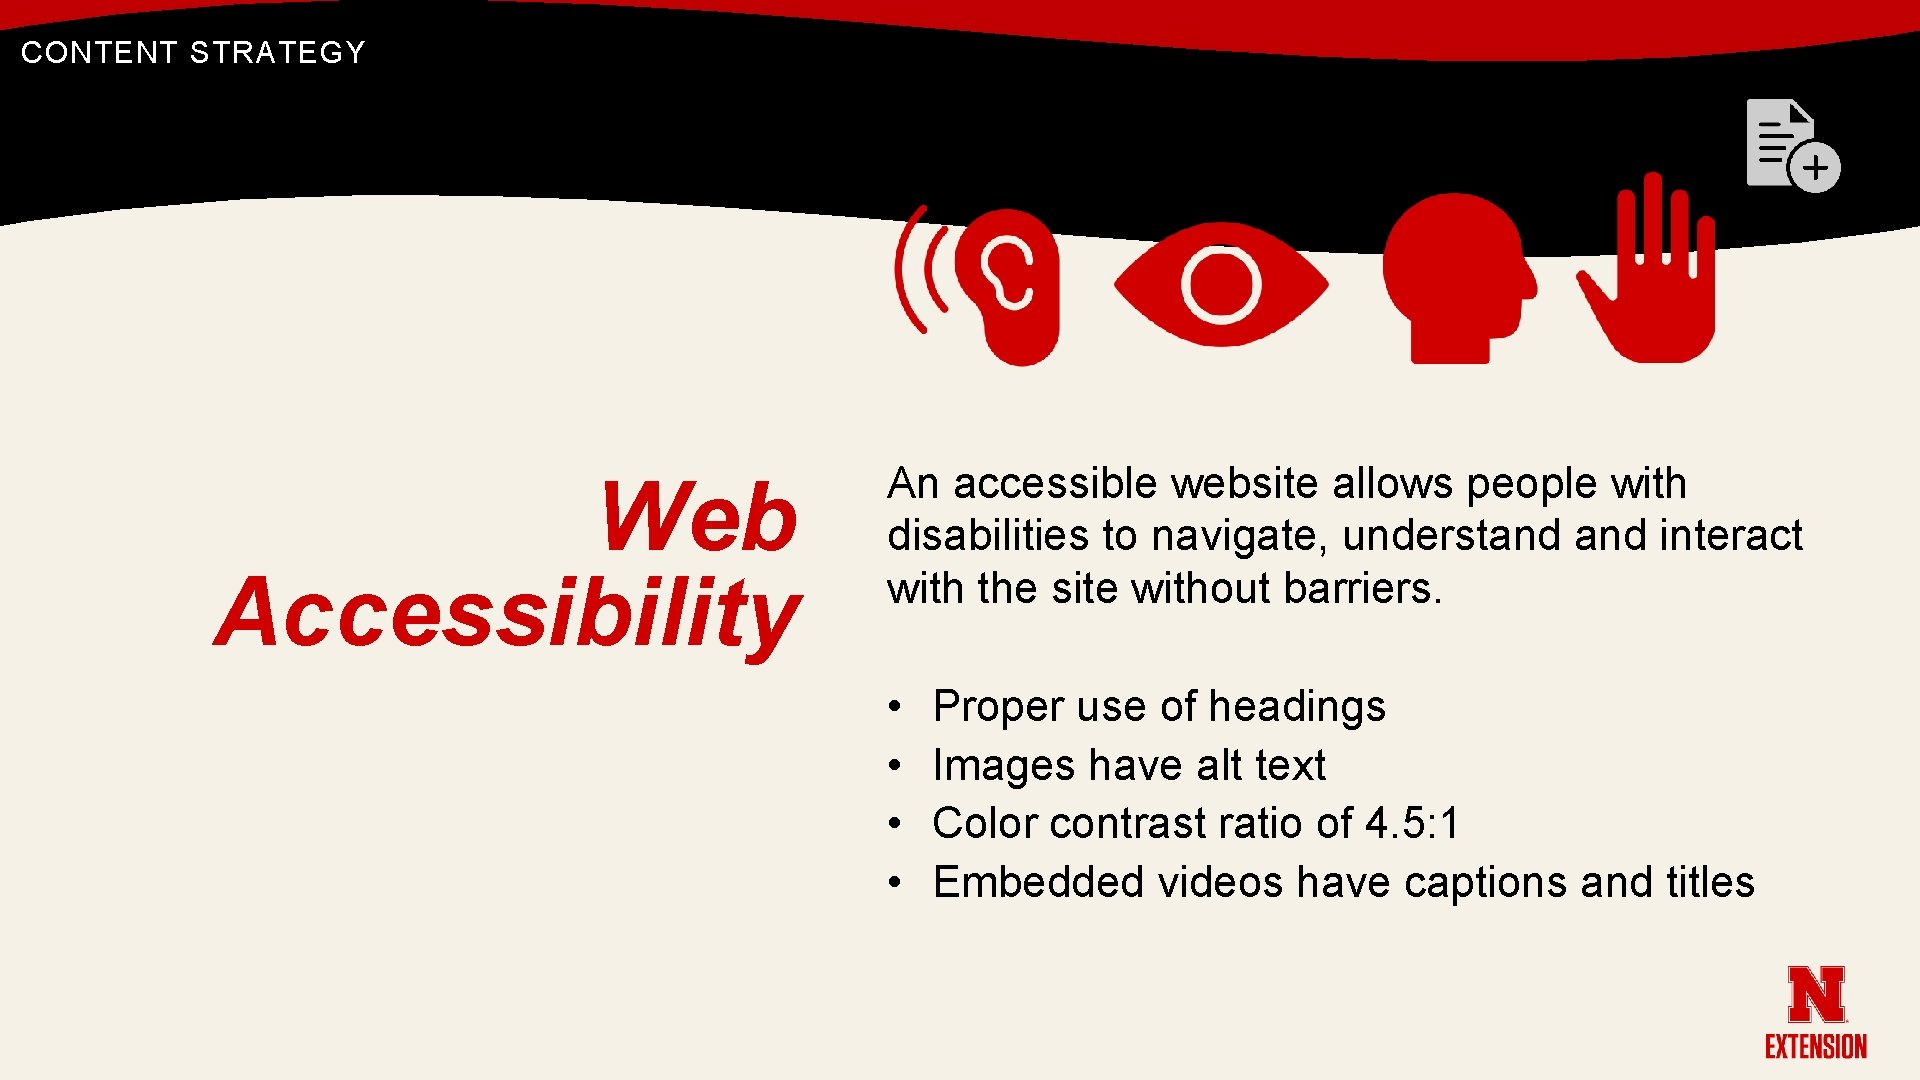 CONTENT STRATEGY Web Accessibility An accessible website allows people with disabilities to navigate, understand